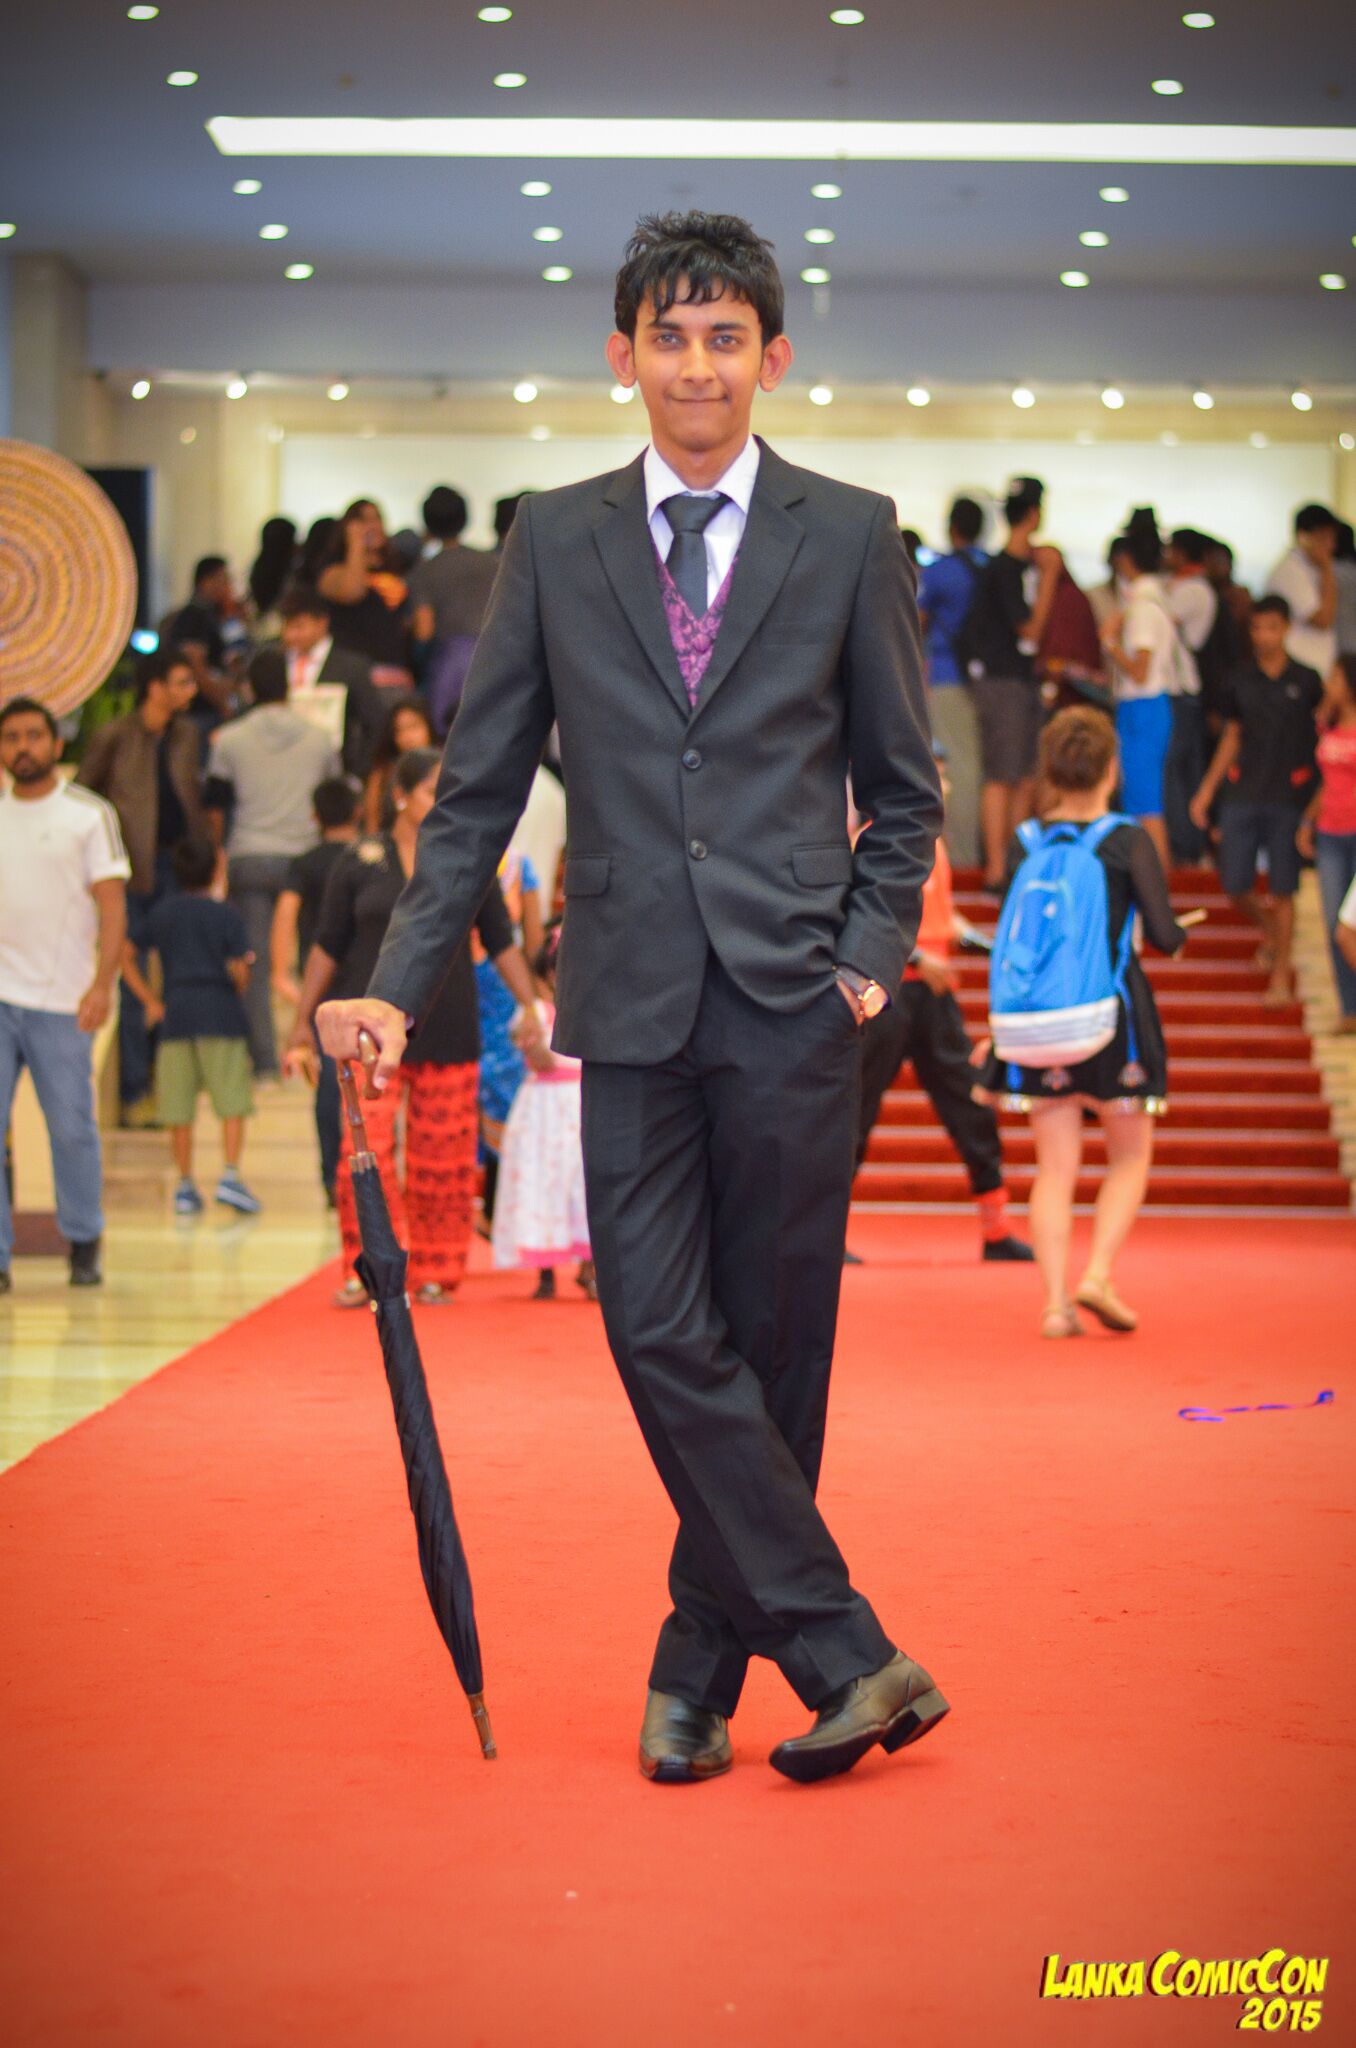 One of the cosplays from last year’s Lanka Comic Con, and winner of the best villain cosplay. All this guy seems to have used was a suit, an umbrella, and a creepy Oswald Cobblepot smile ‒ and he nailed it. Bravo Mr. Penguin. Credits: Lanka ComicCon